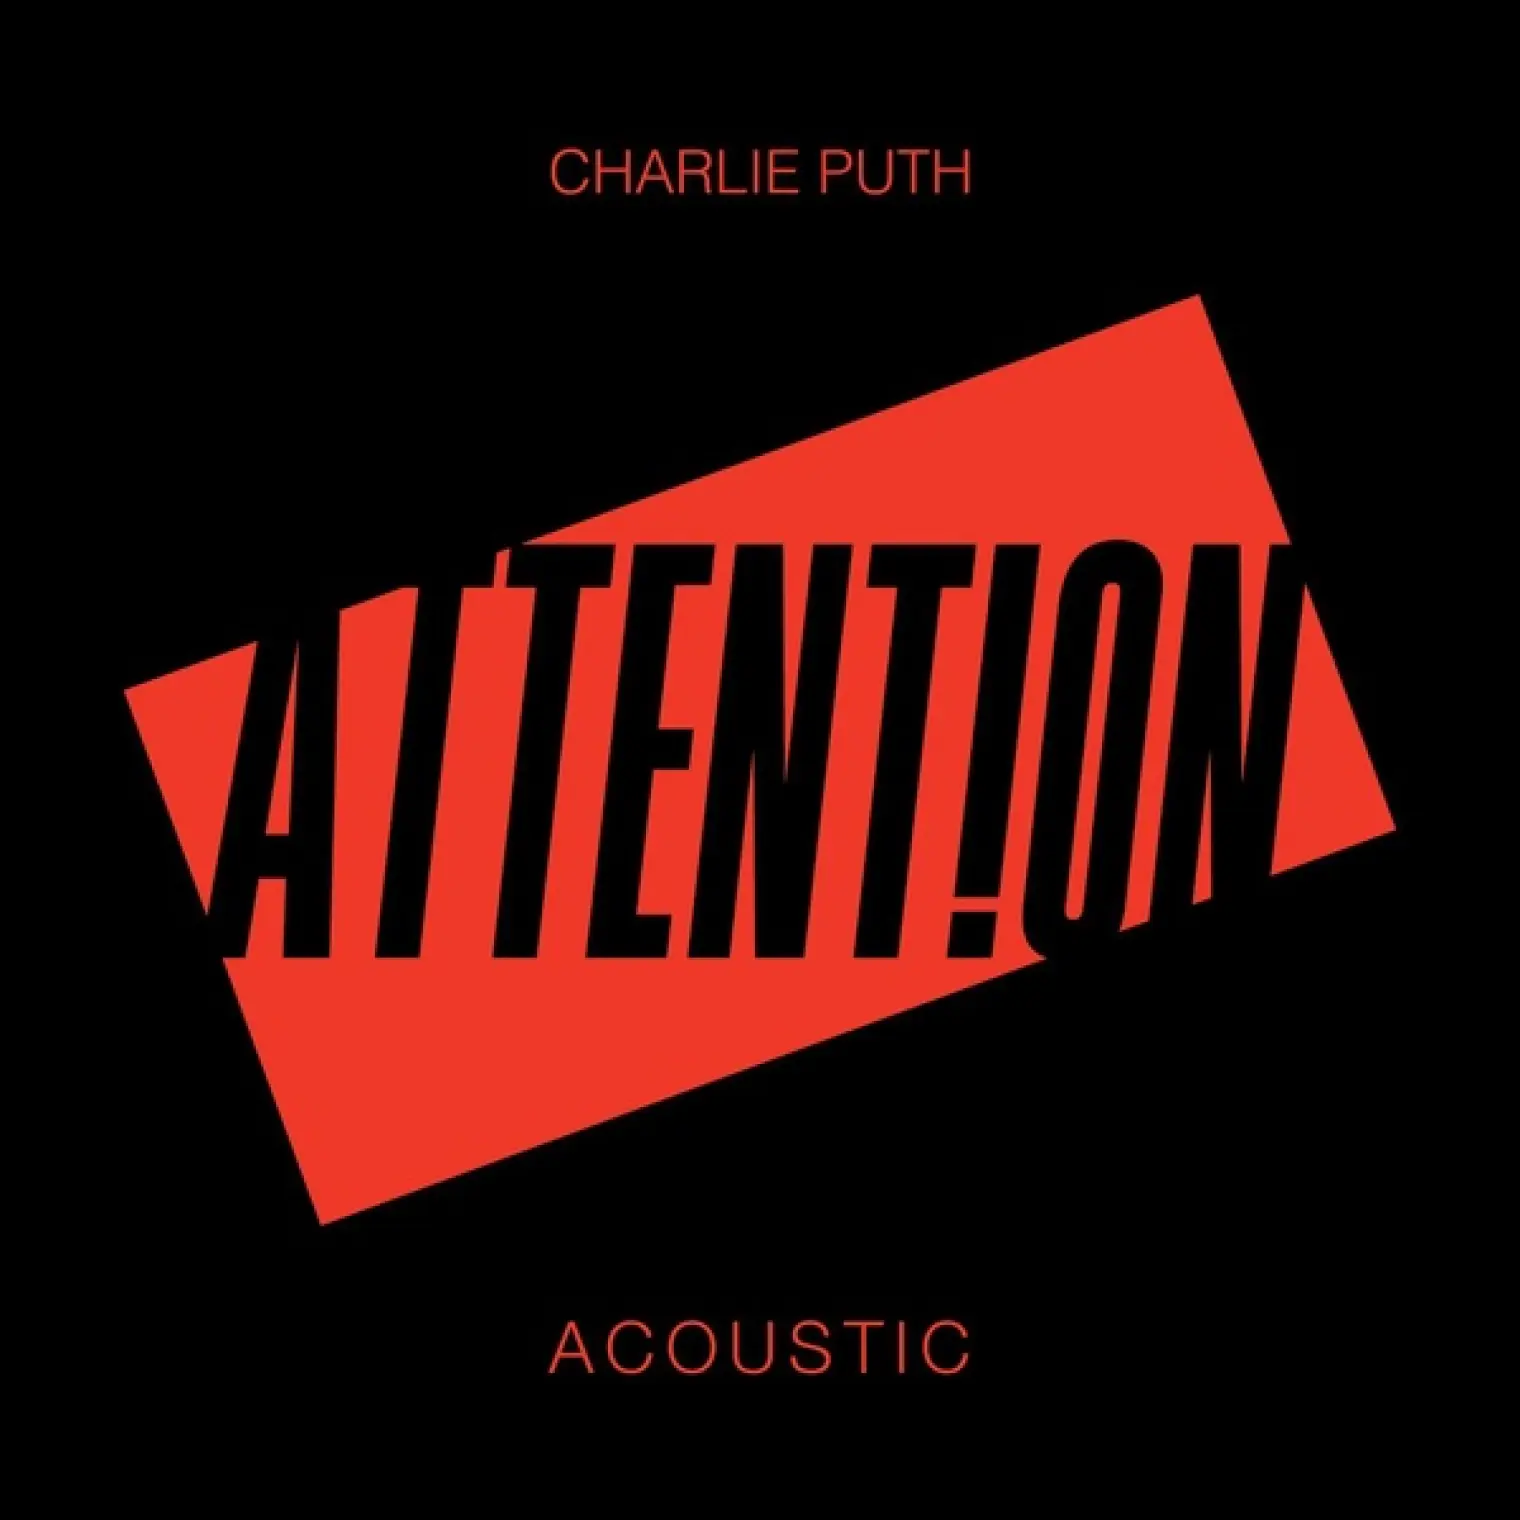 Attention (Acoustic) -  Charlie Puth 